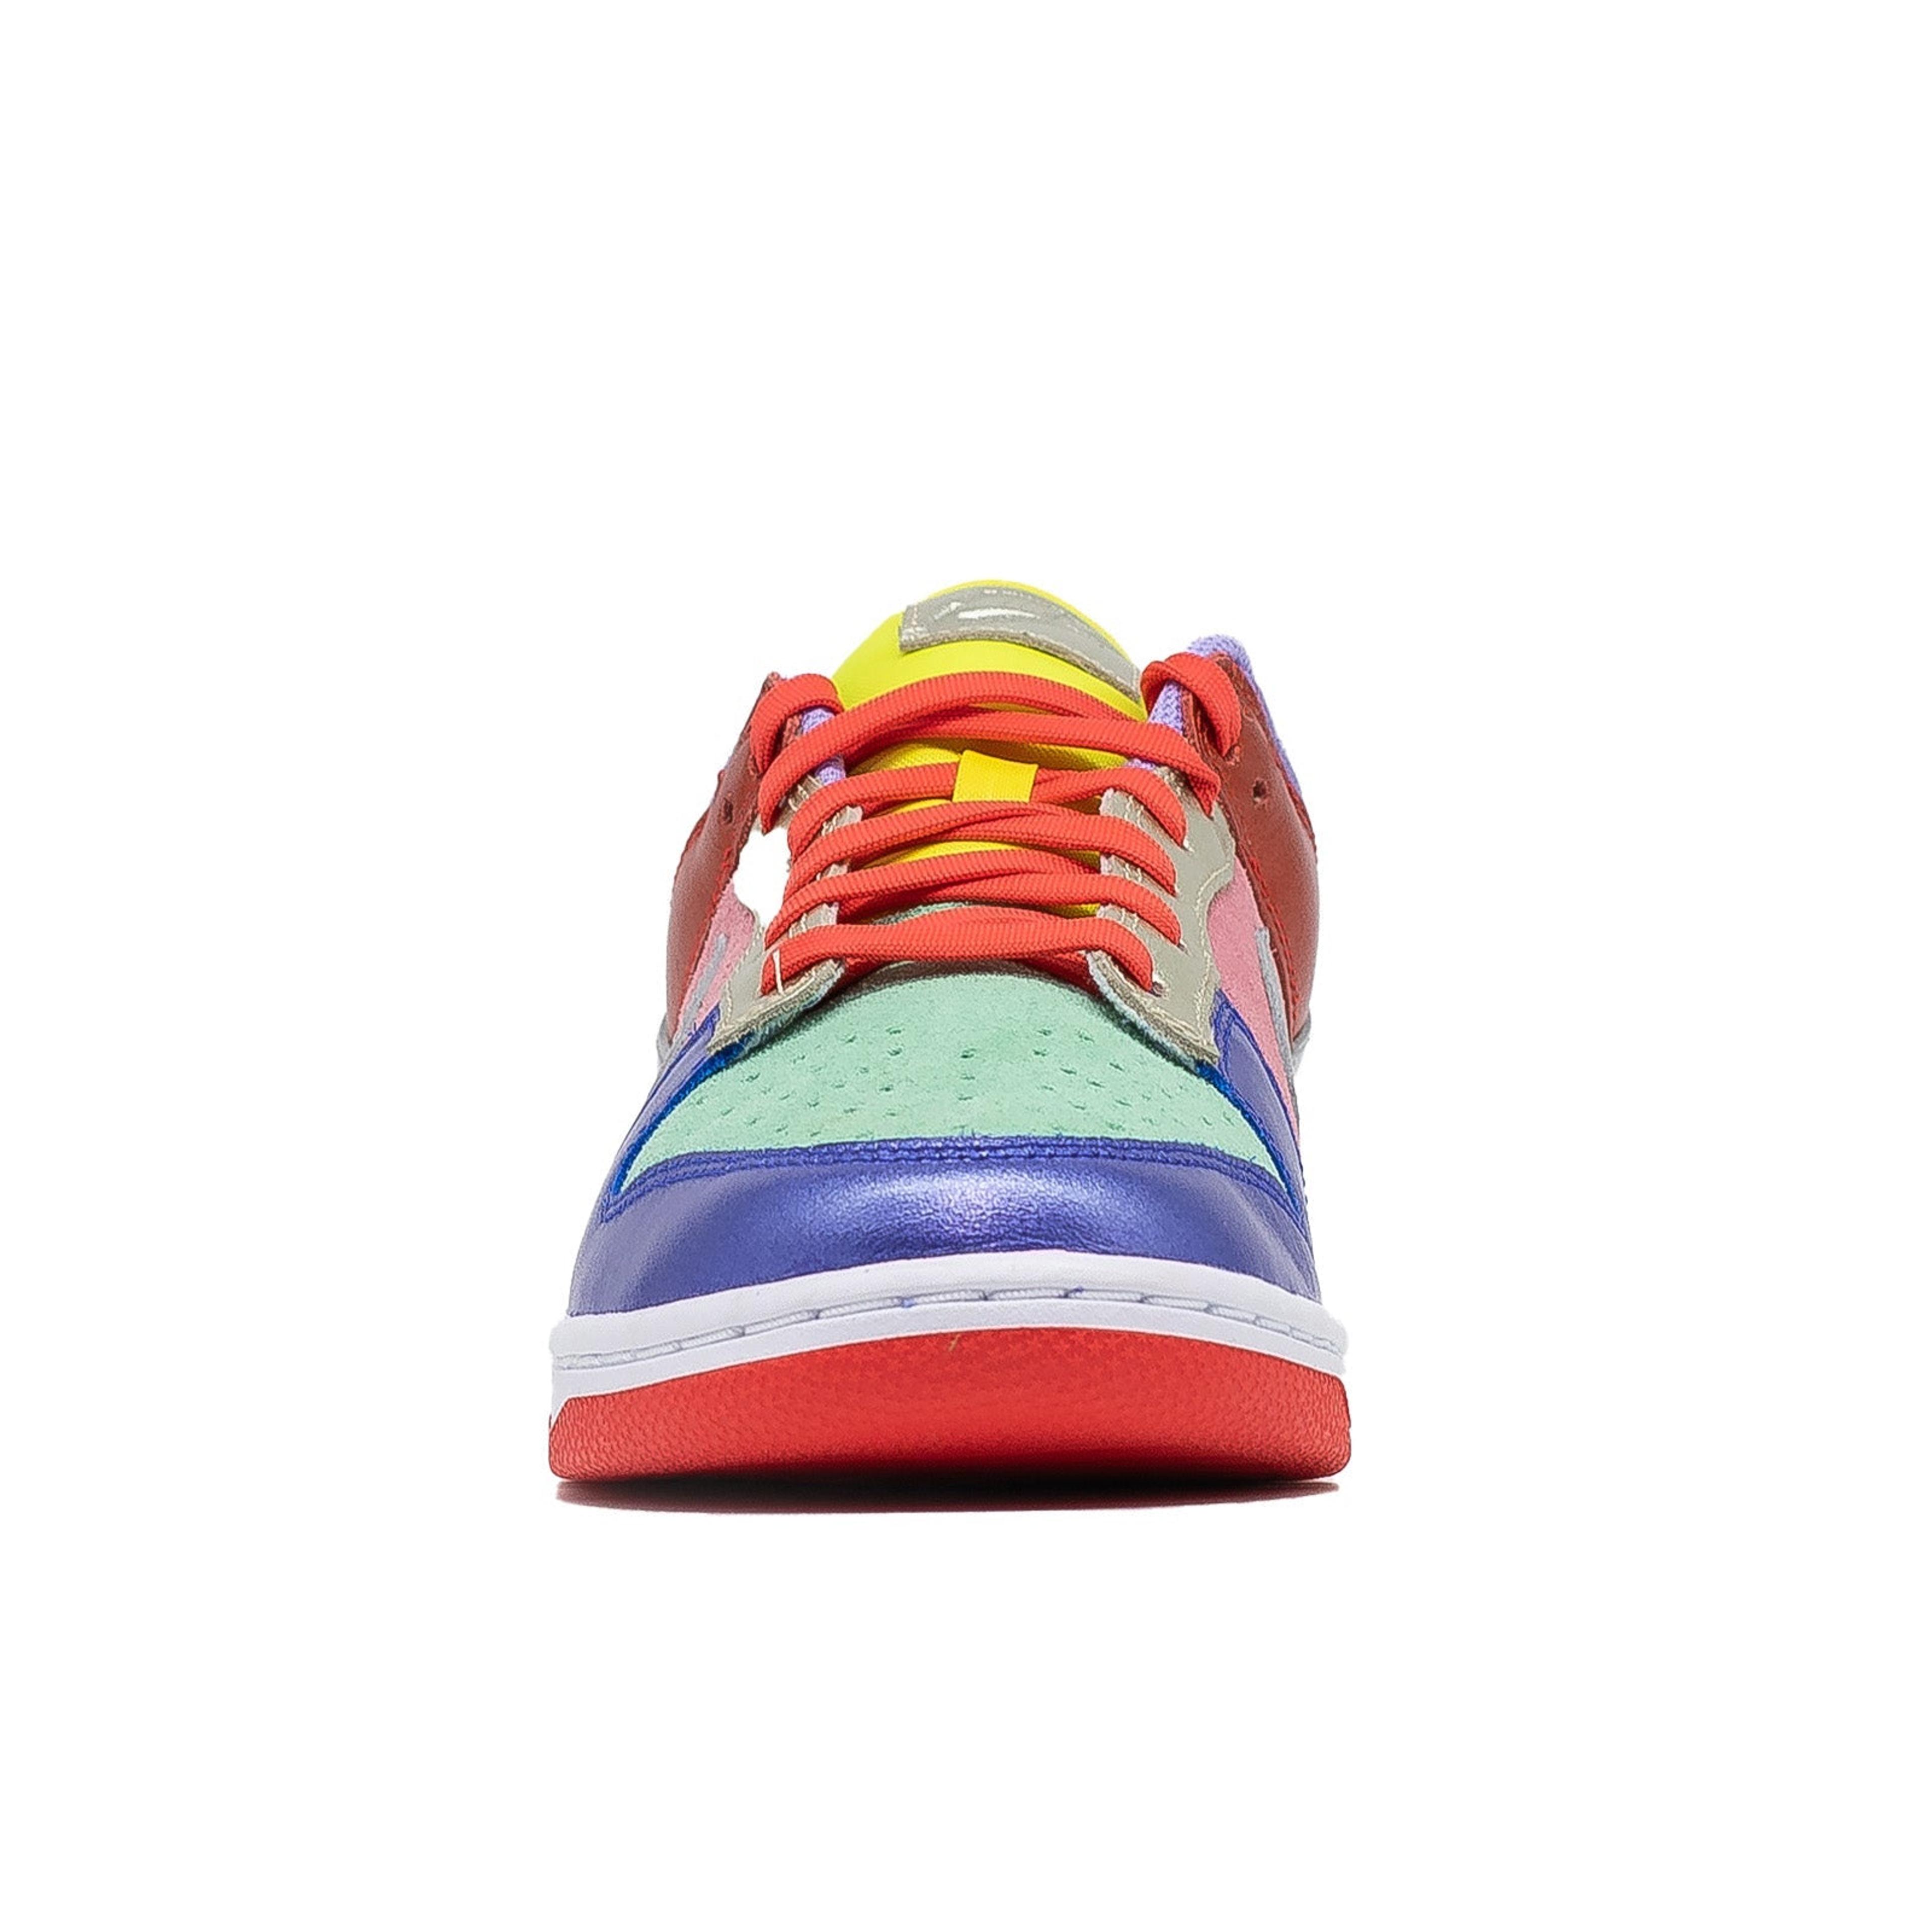 Alternate View 3 of Women's Nike Dunk Low, Sunset Pulse